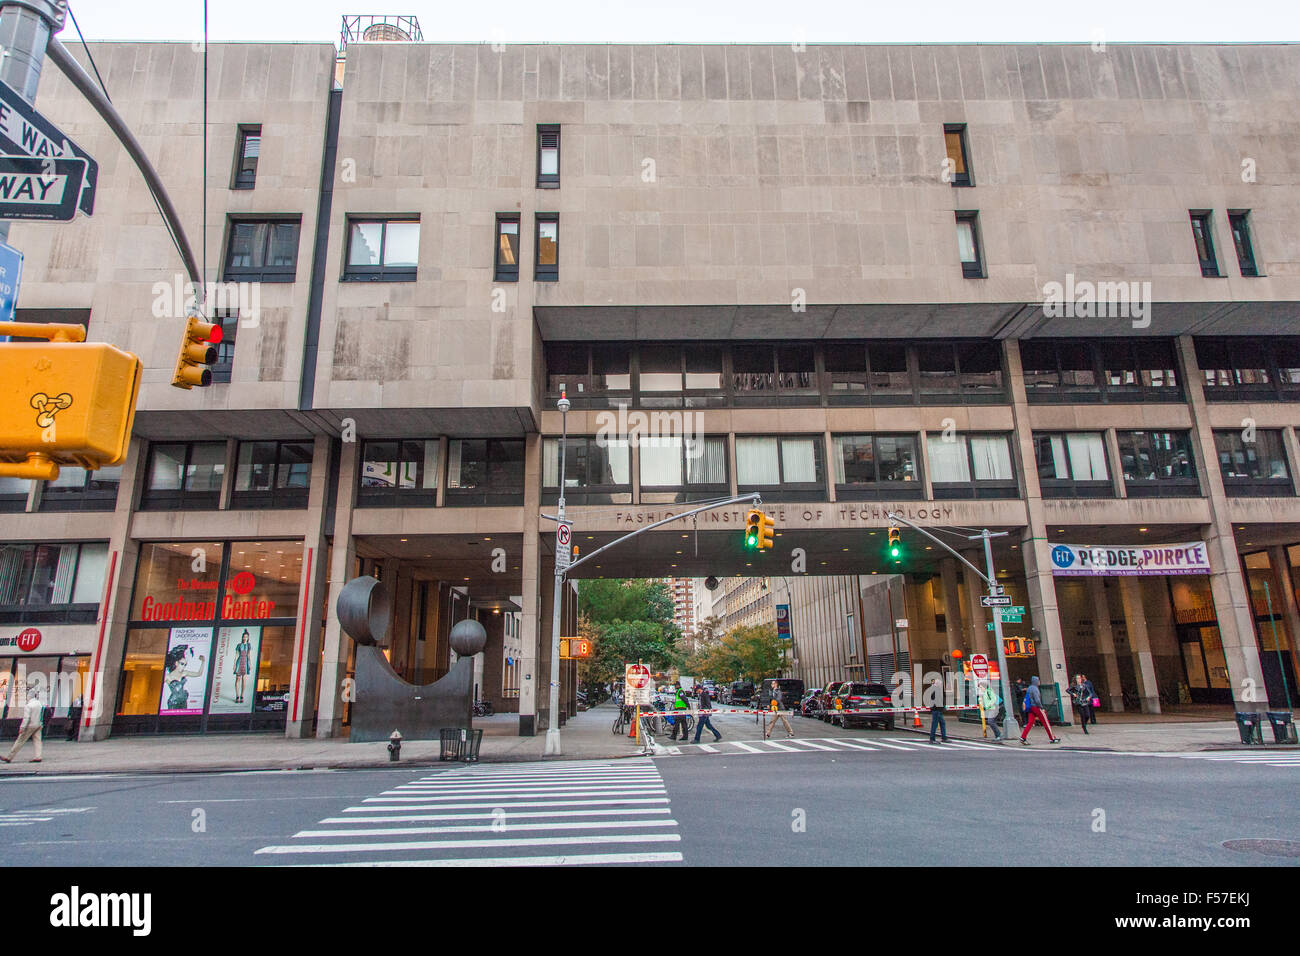 The Fashion Institute of Technology ( FIT ) and the Goodman Center, 7th ...